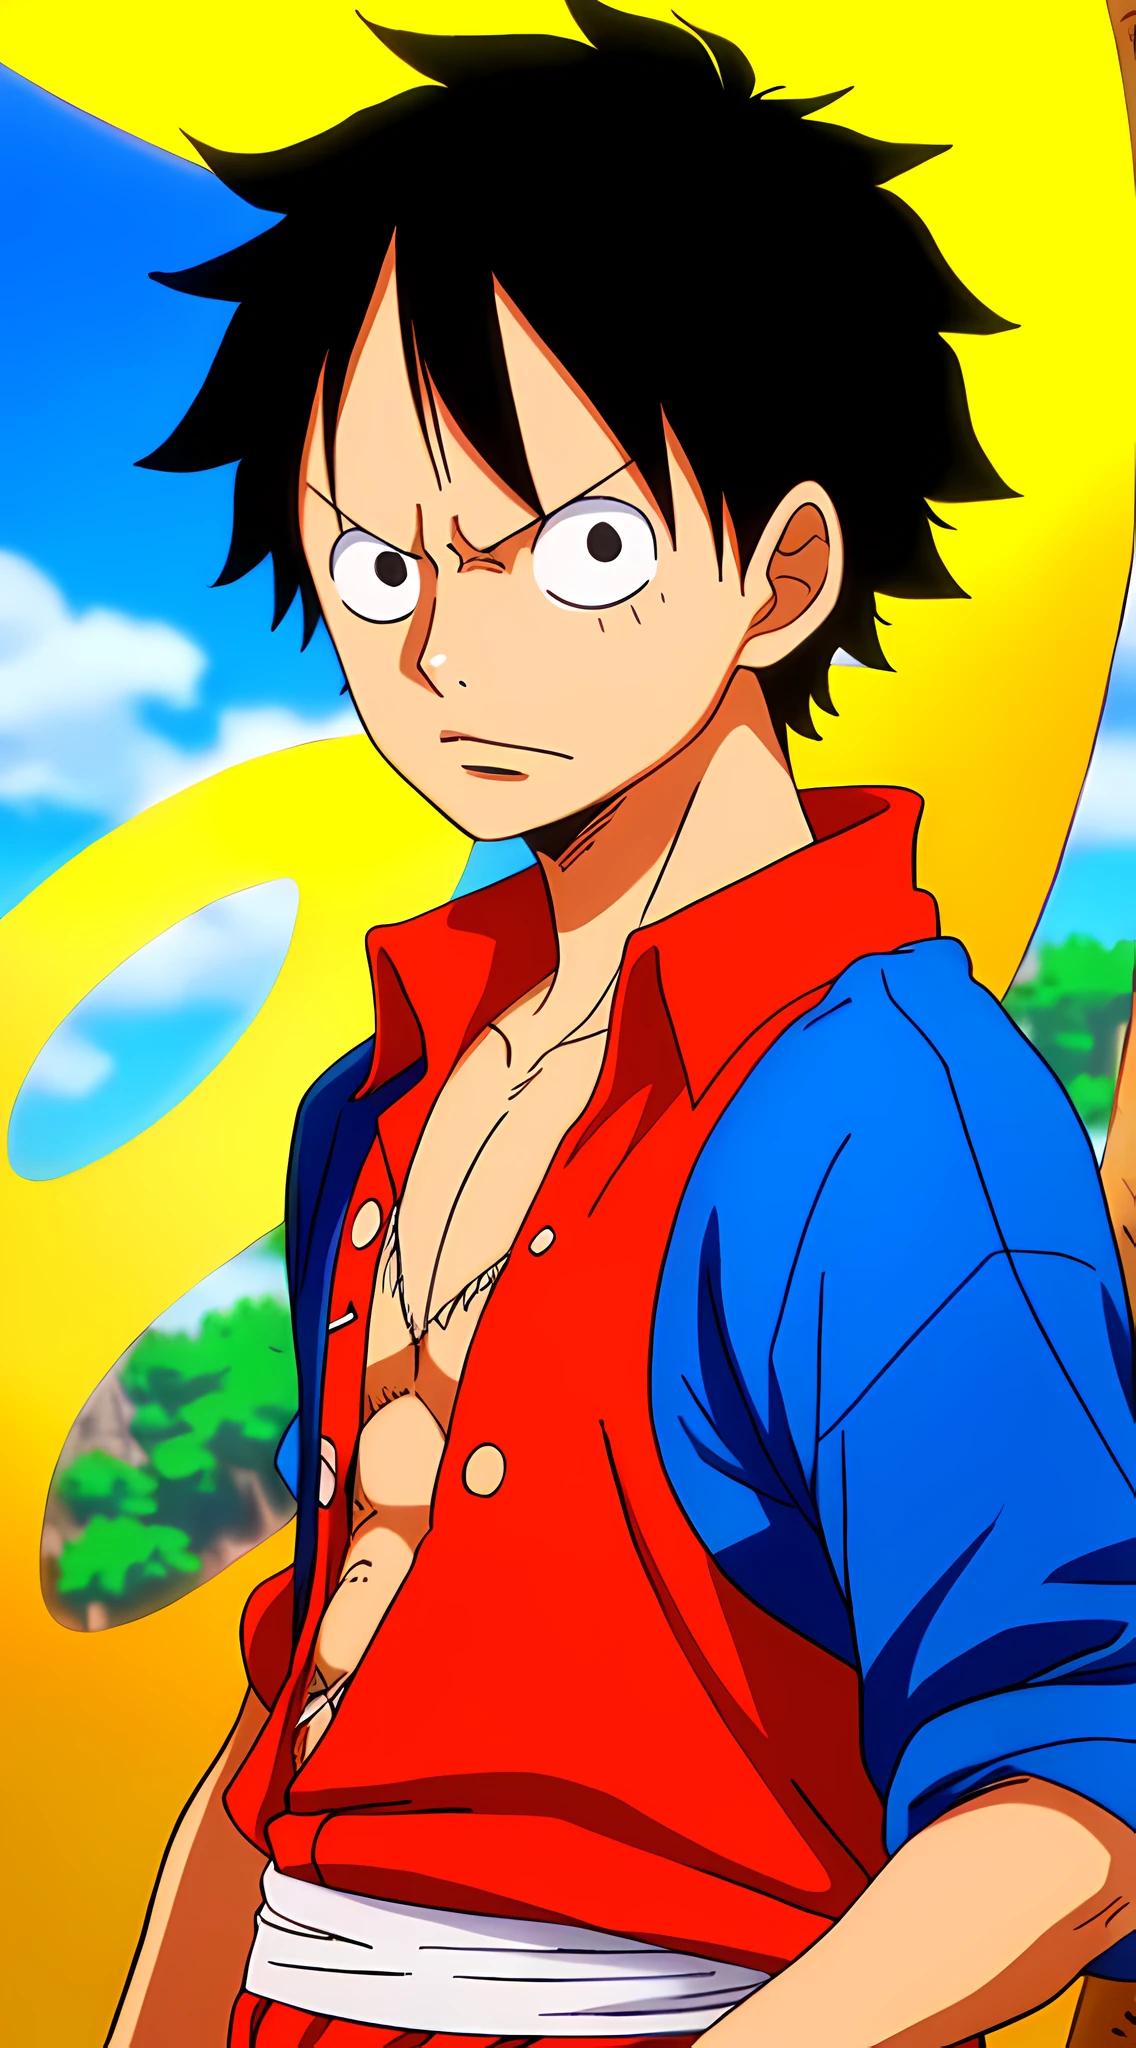 [WanoStyle:1.3] monkey d Luffy, the protagonist of One Piece, is depicted in a [portrait picture] with [best quality]. His [wanostyle] design reflects the artistic and cultural style of the Wano Country.